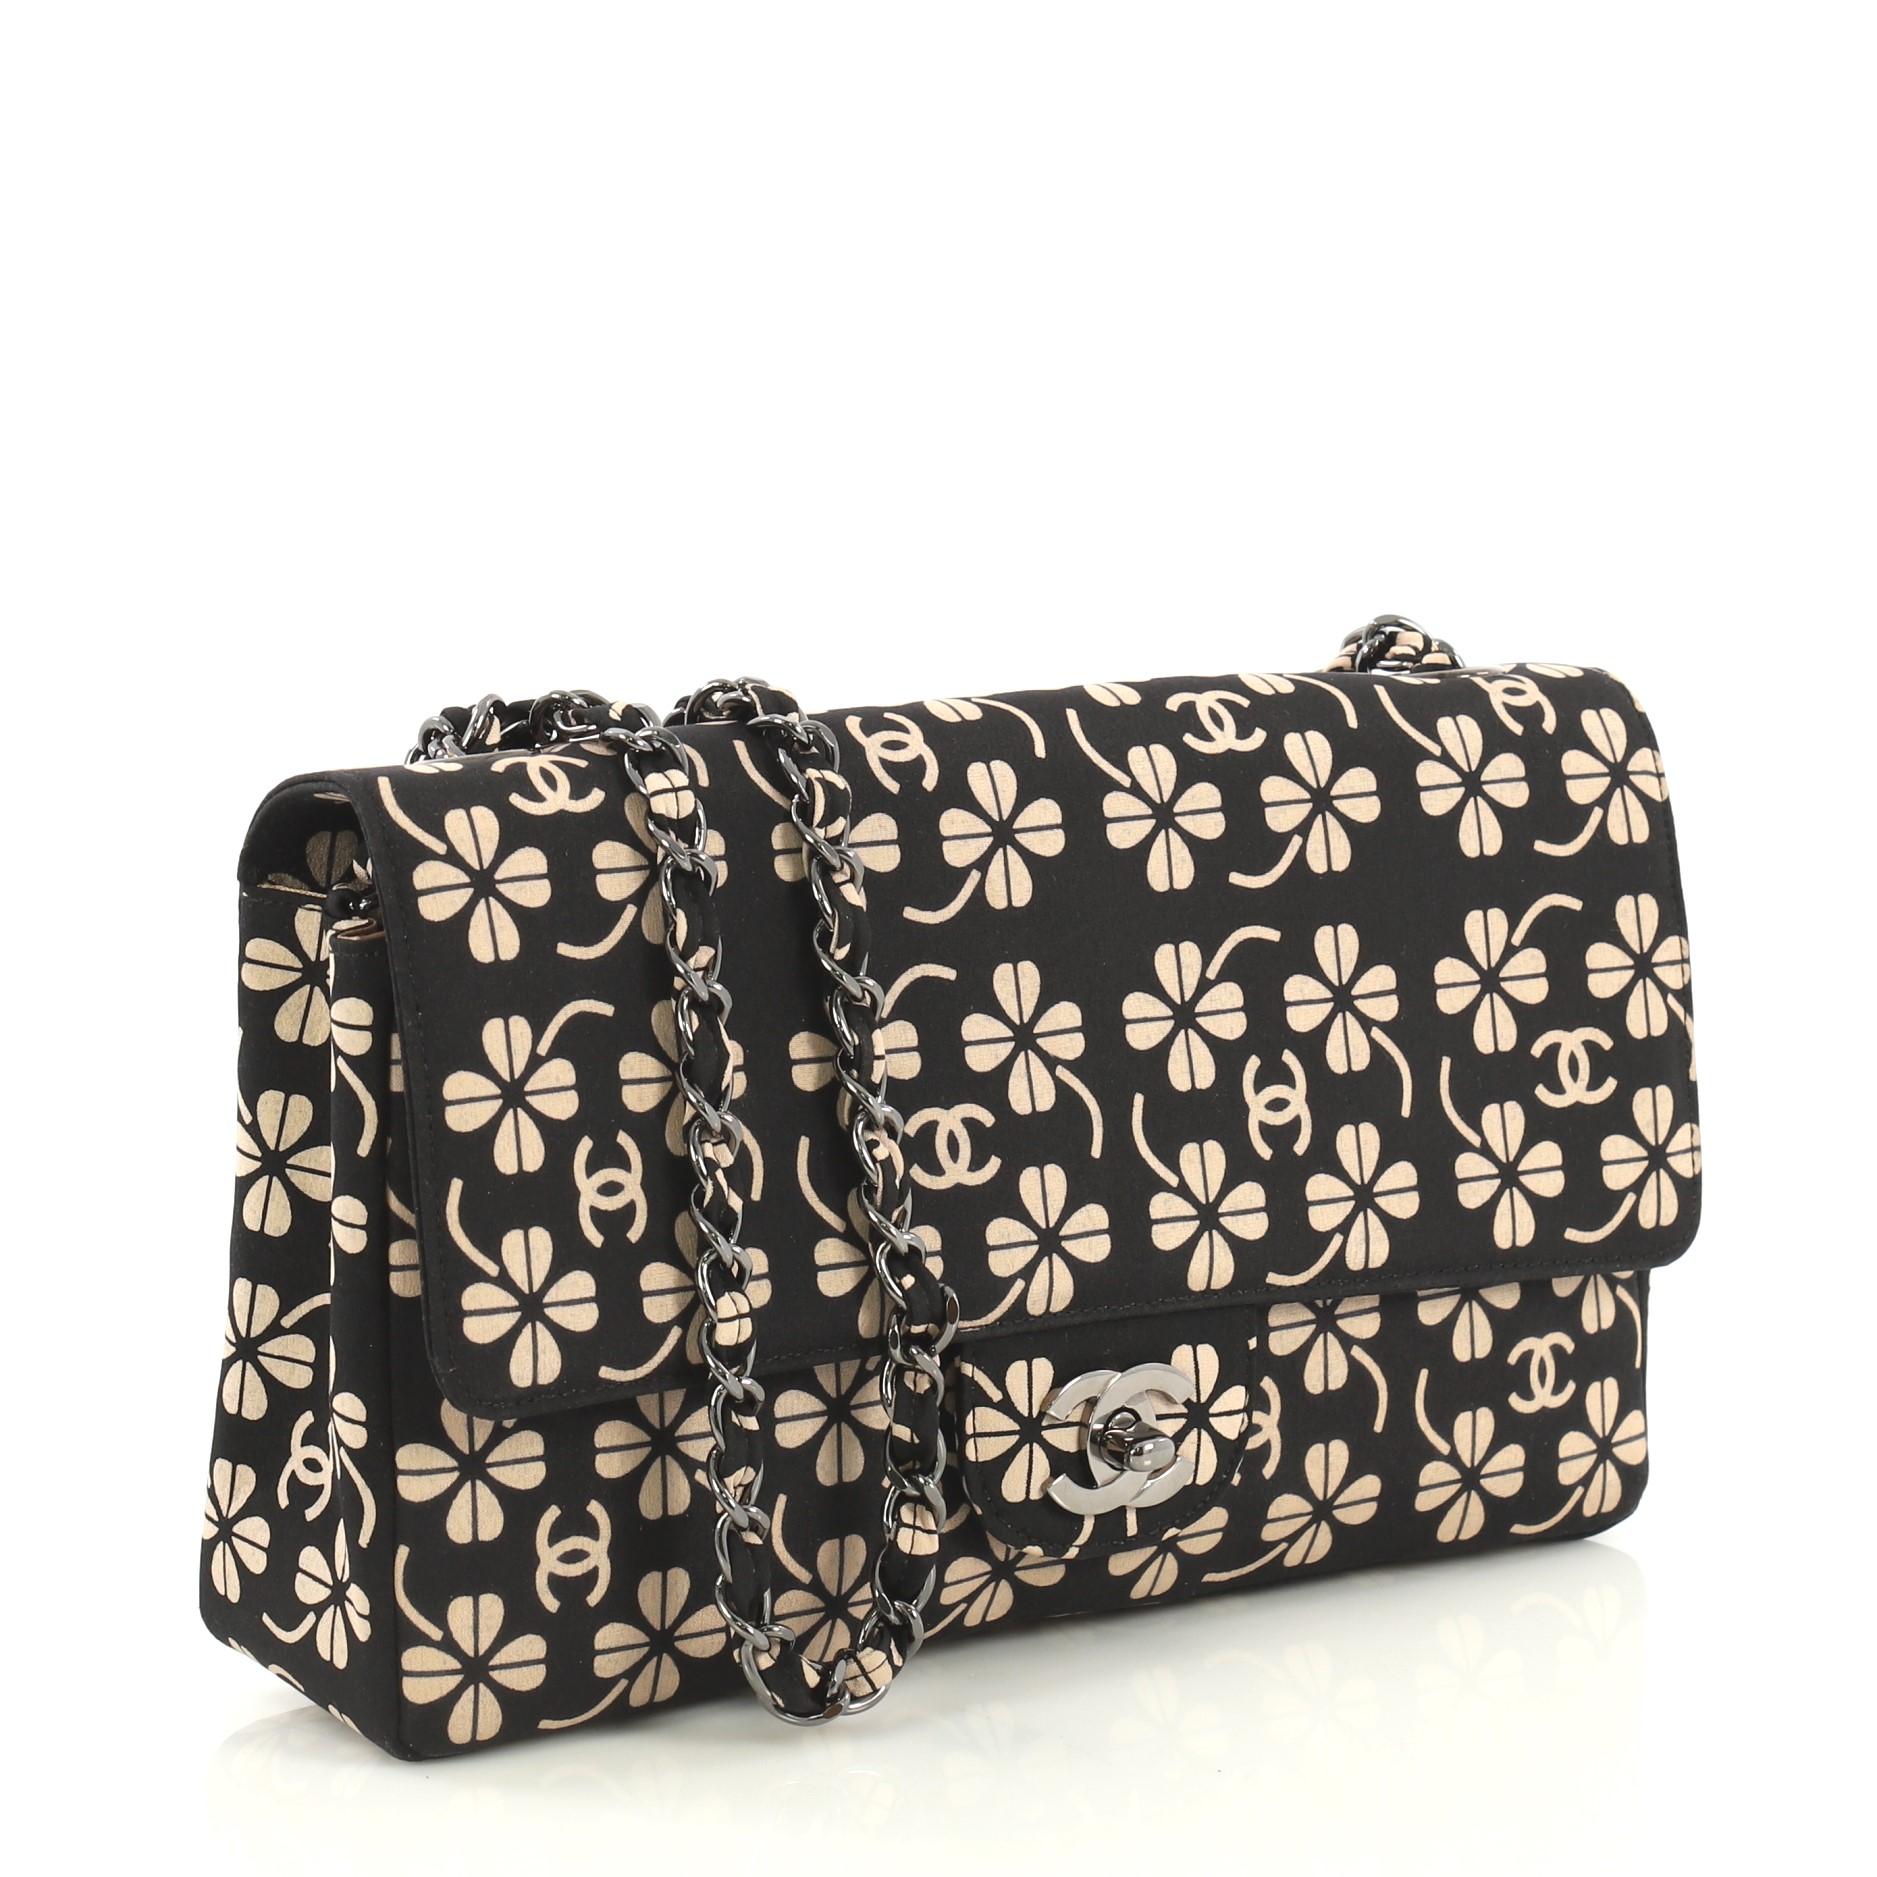 This Chanel Vintage CC Chain Flap Bag Printed Canvas Medium, crafted in black printed canvas, features a woven in canvas chain link strap and gunmetal-tone hardware. Its CC turn-lock closure opens to a beige satin interior with zip and slip pockets.